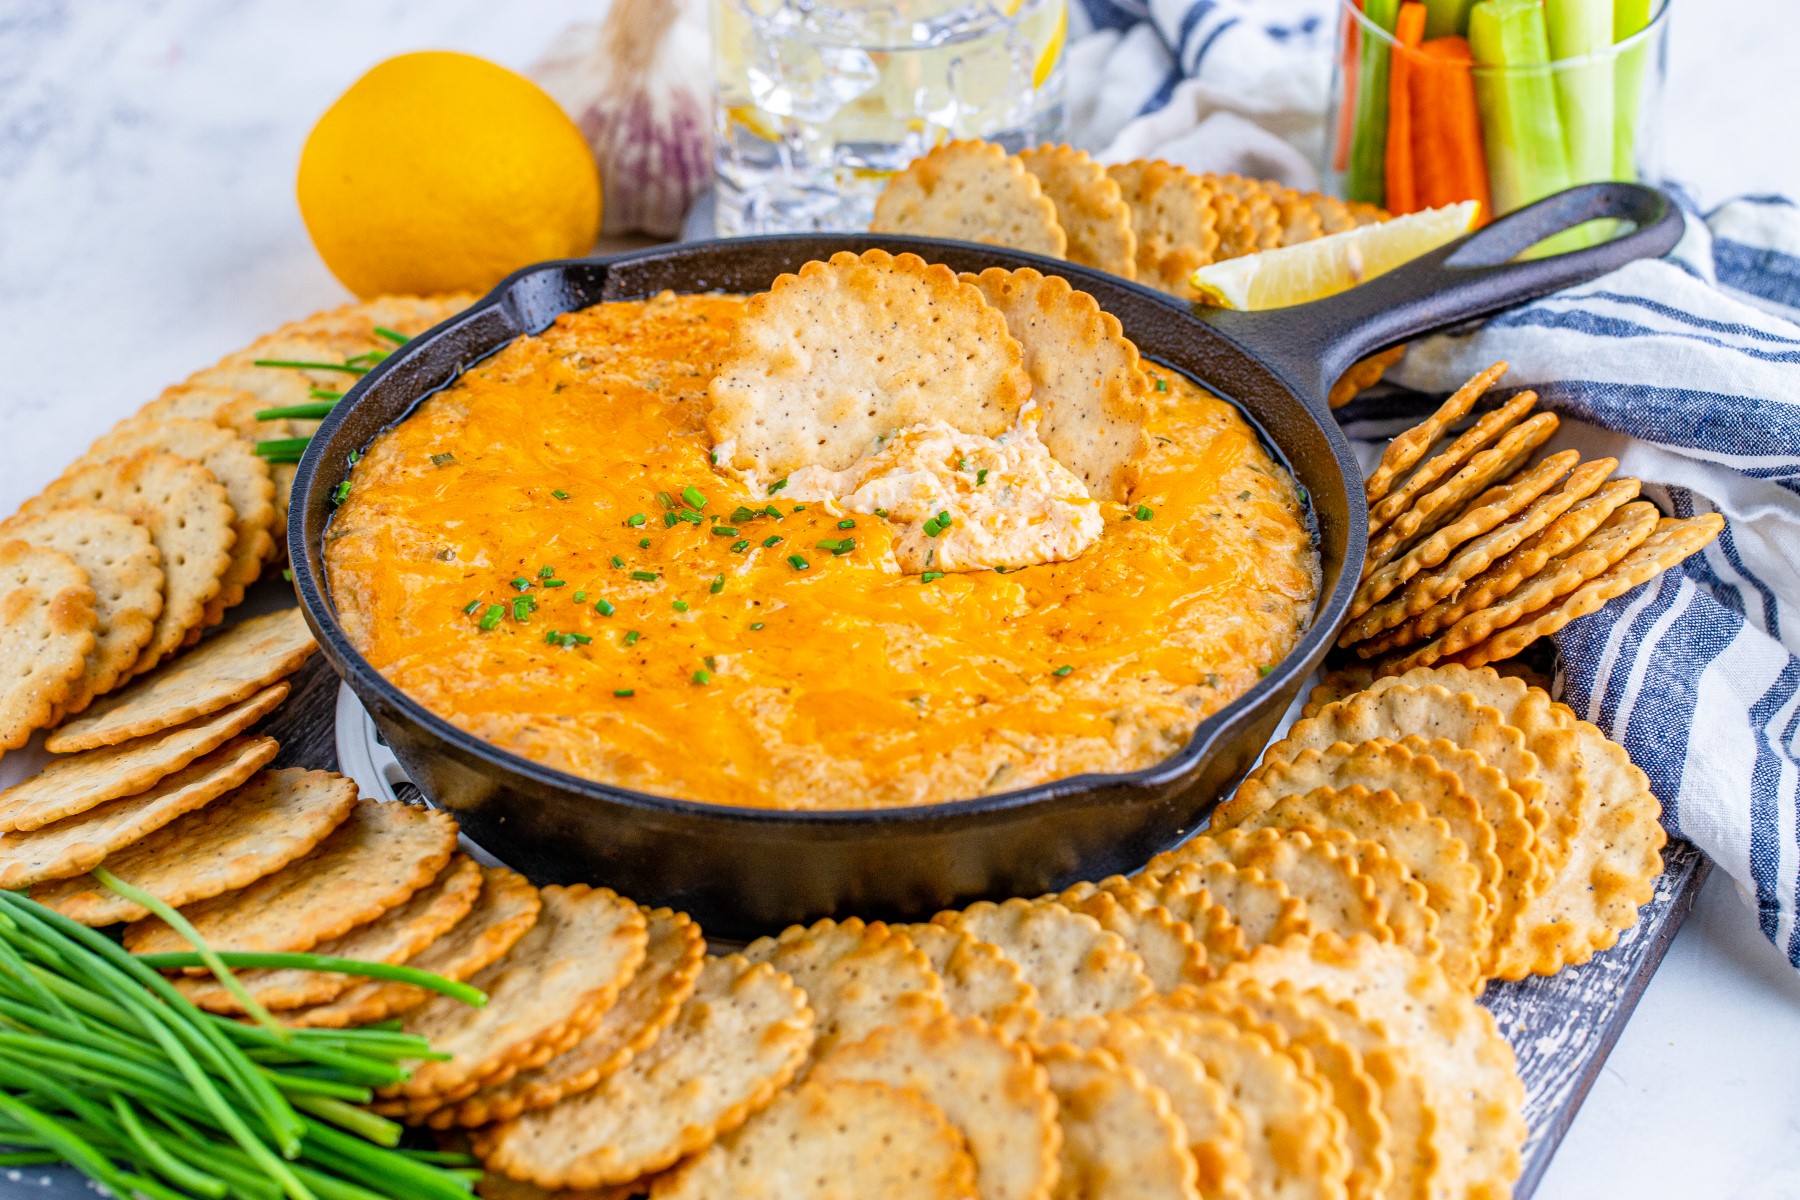 Cast iron skillet with smoked crab dip served with crackers.